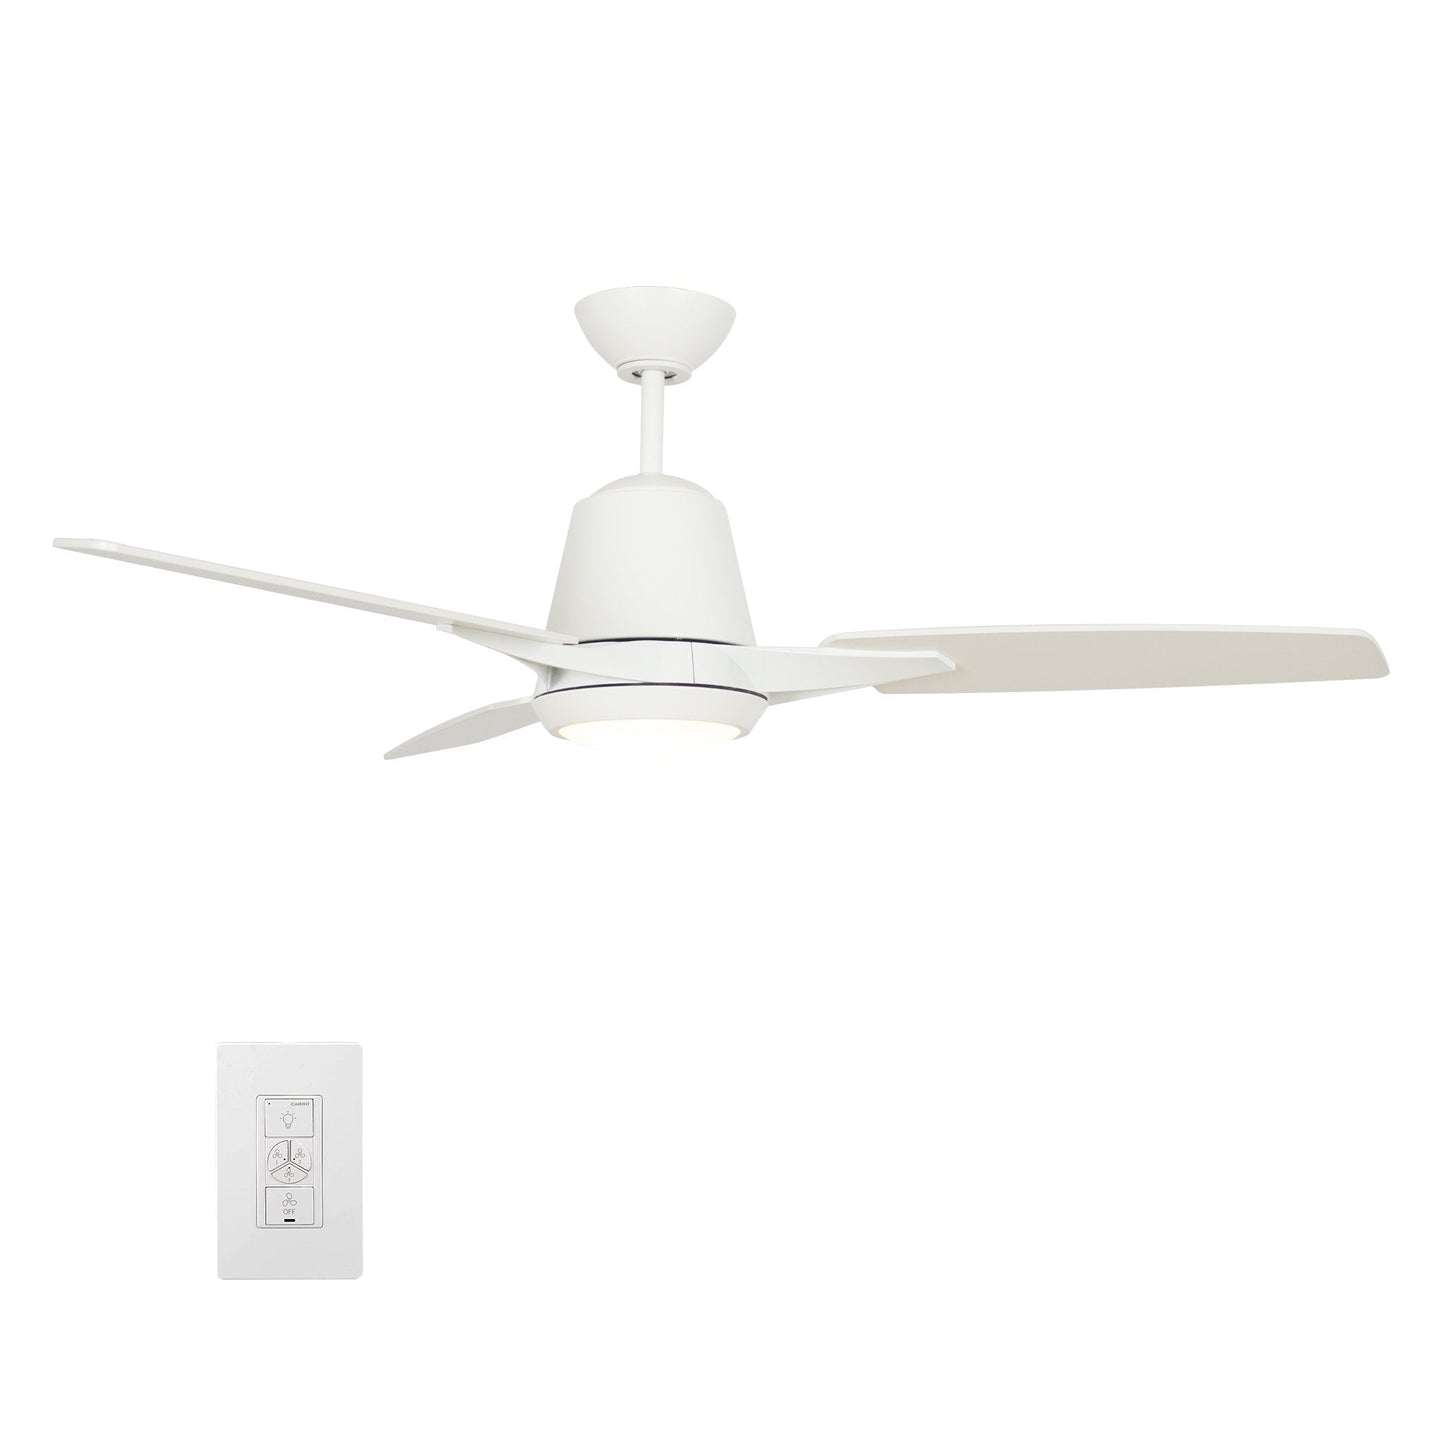 Exton 52'' Best Smart Ceiling Fan with wall control, Light Kit Included, Works with Google Assistant and Amazon Alexa,Siri Shortcut